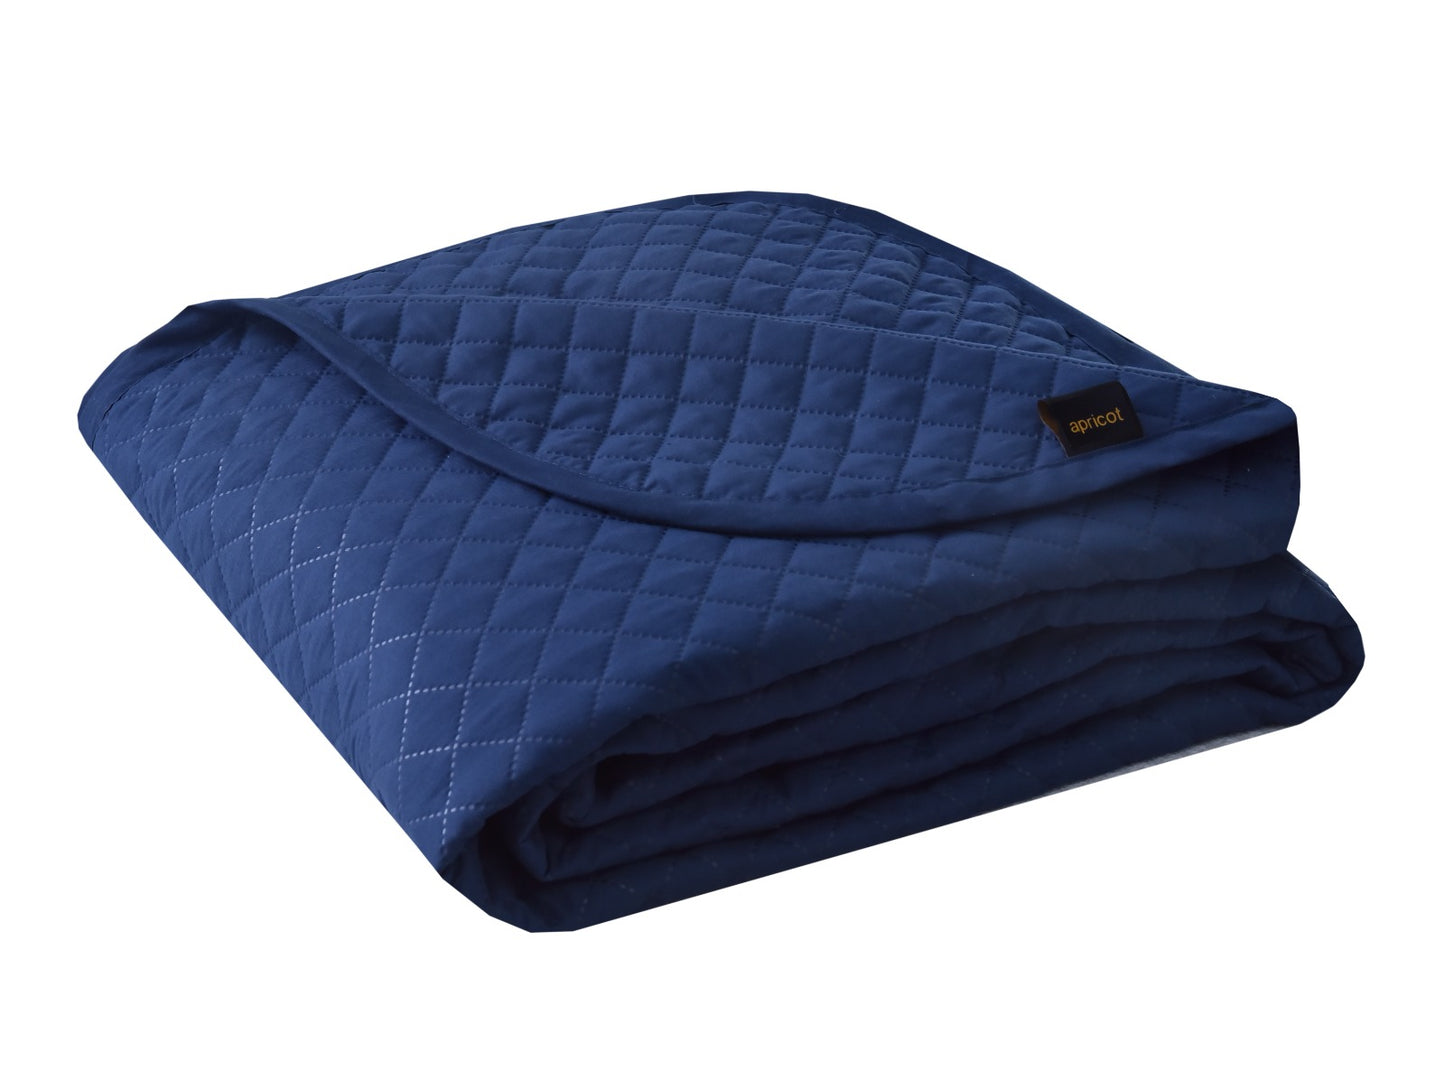 4 PCs Ultrasonic Quilted Luxury Bed Spread Set-Blue Apricot